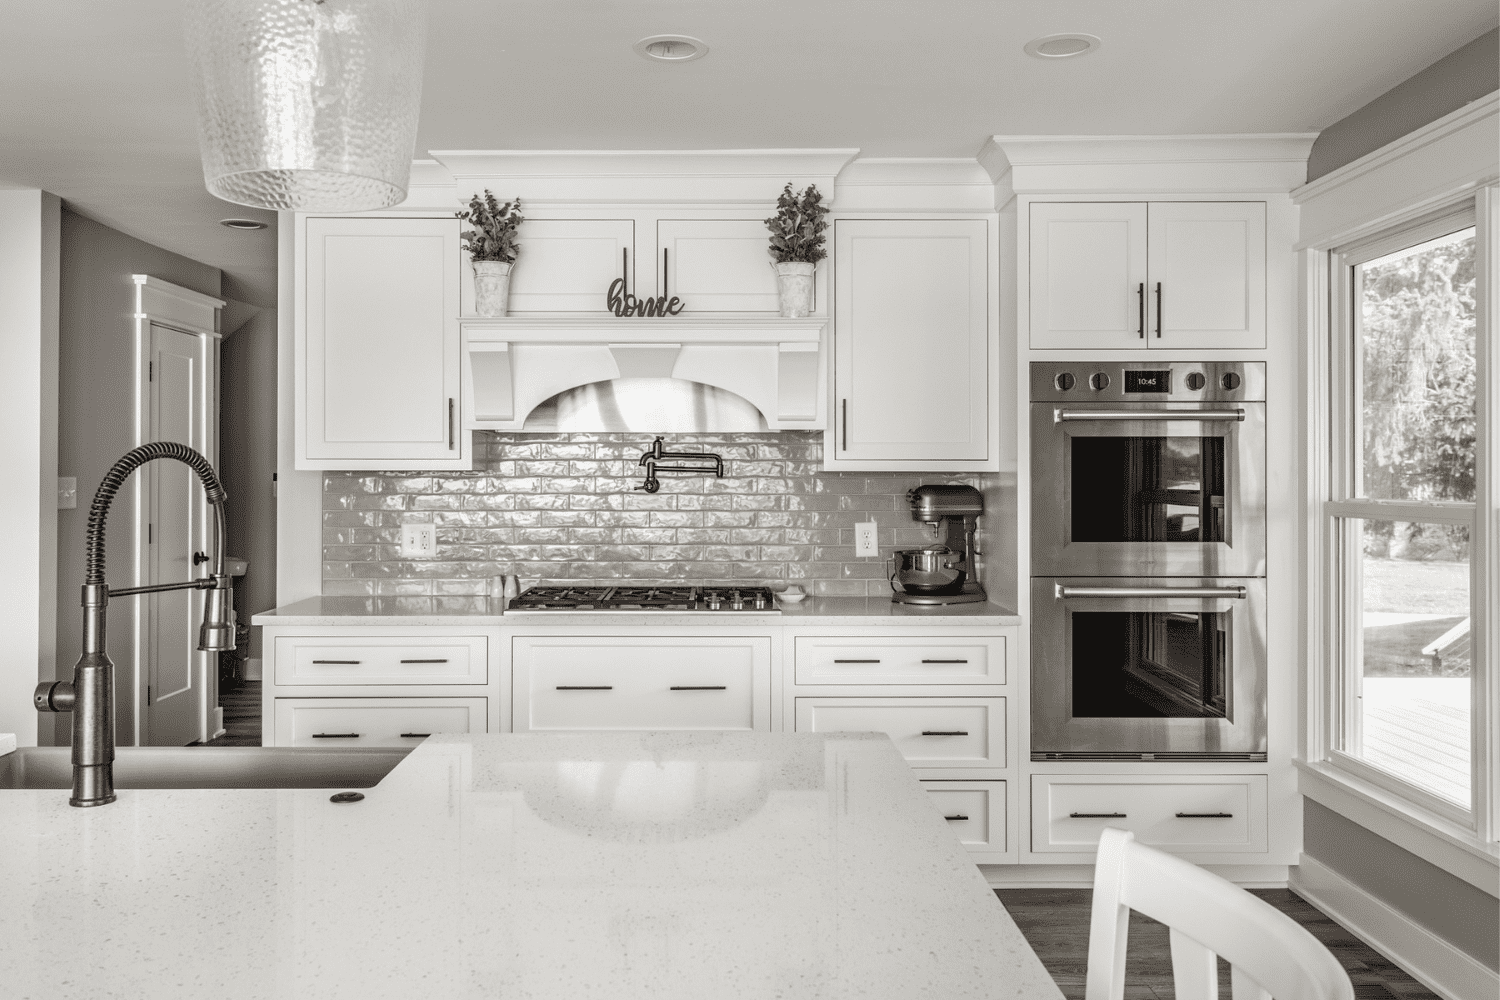 Nicholas Design Build | A black and white photo of a kitchen with white cabinets.